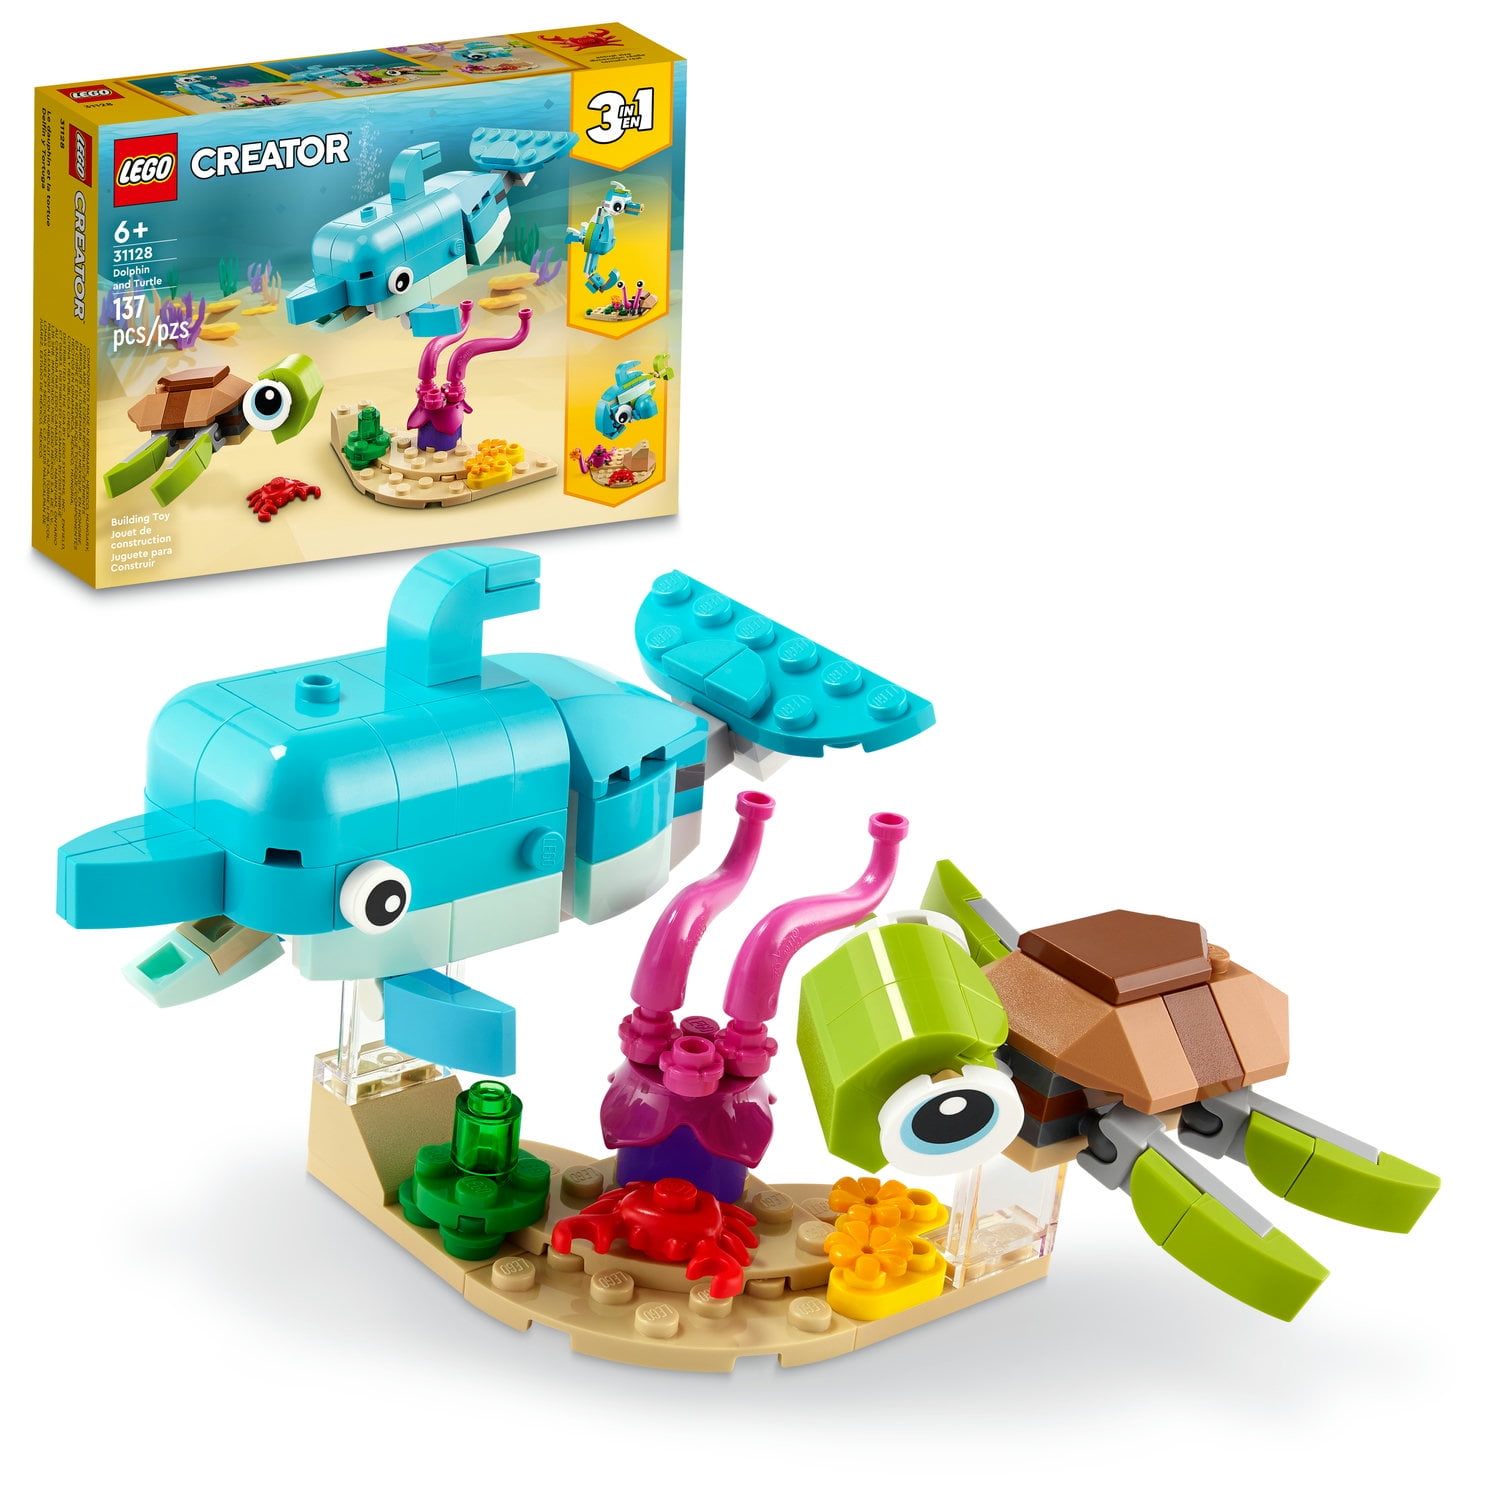 LEGO Creator 3in1 Dolphin and Turtle 31128 Building Kit; Features a Baby Dolphin and Baby Sea Turtle; Creative Gift for Kids Aged 6+ Who Love Imaginative Play (137 Pieces)